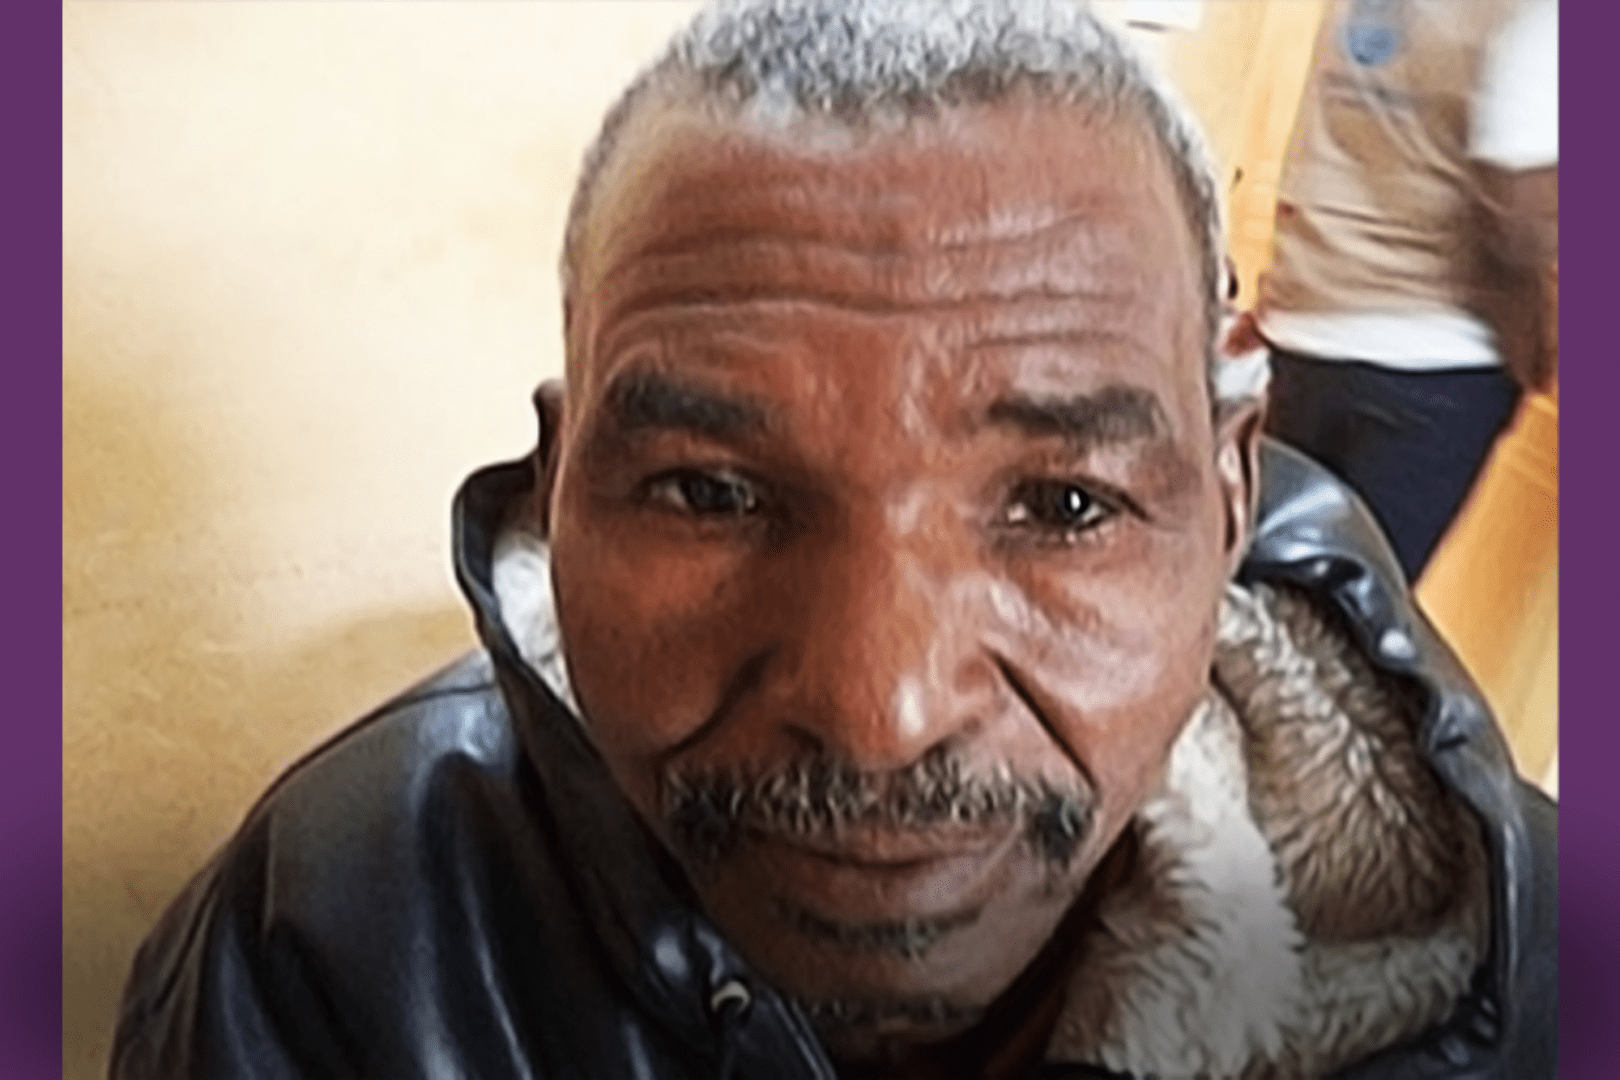 A older African man looks into the camera.